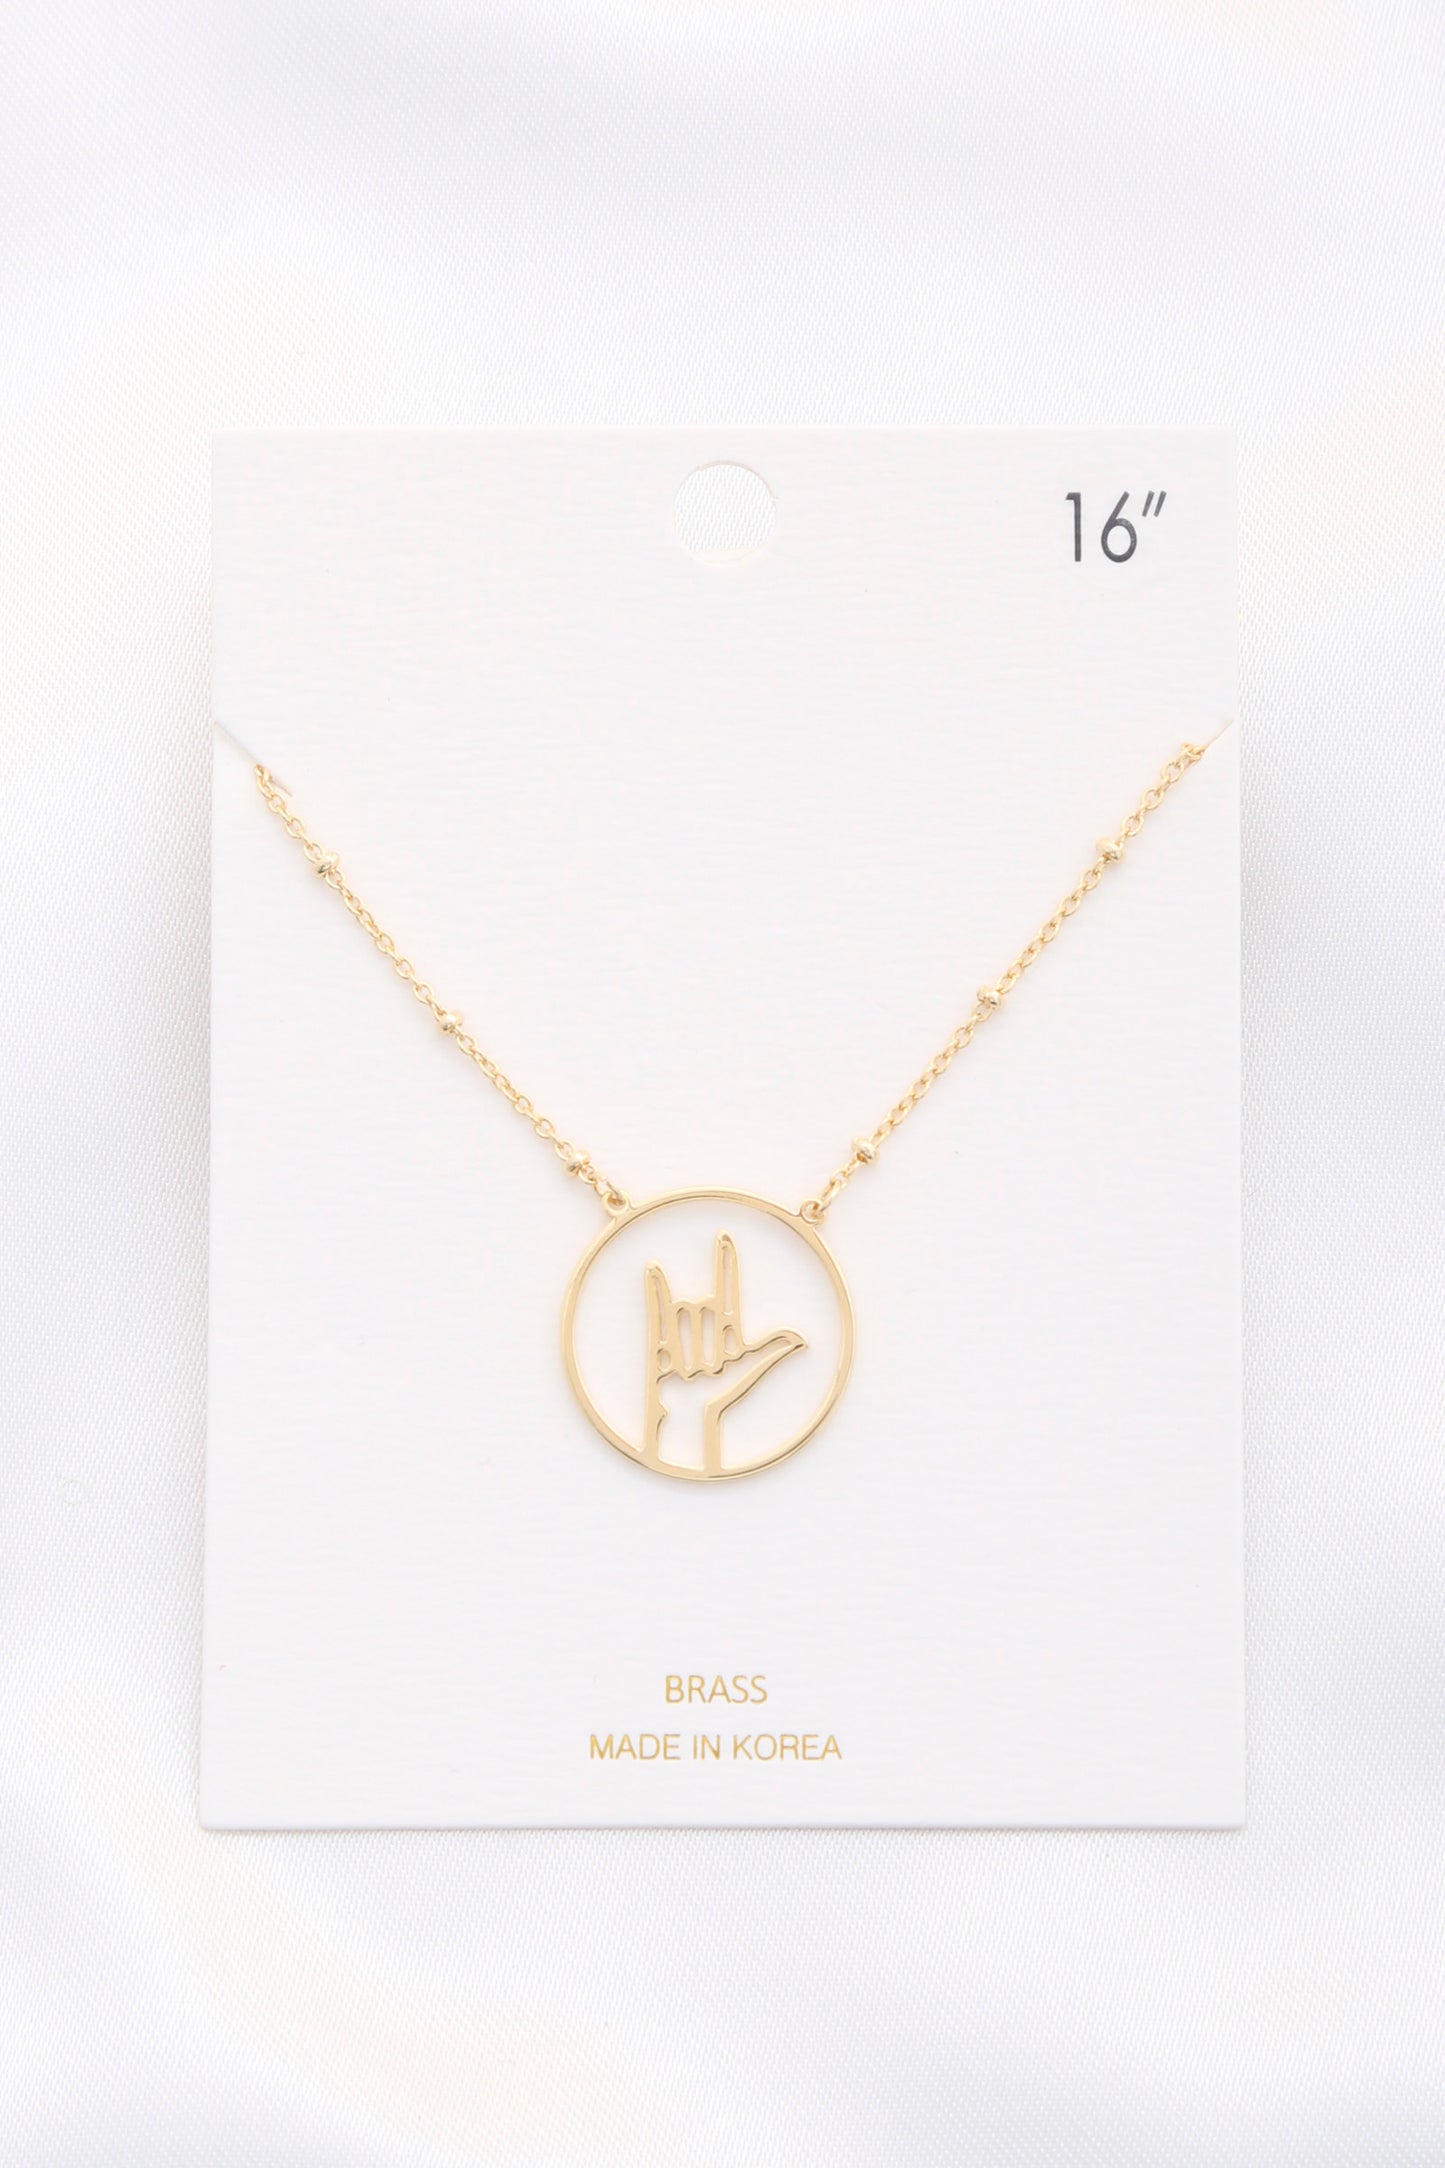 Open Peace Hand Sign Necklace